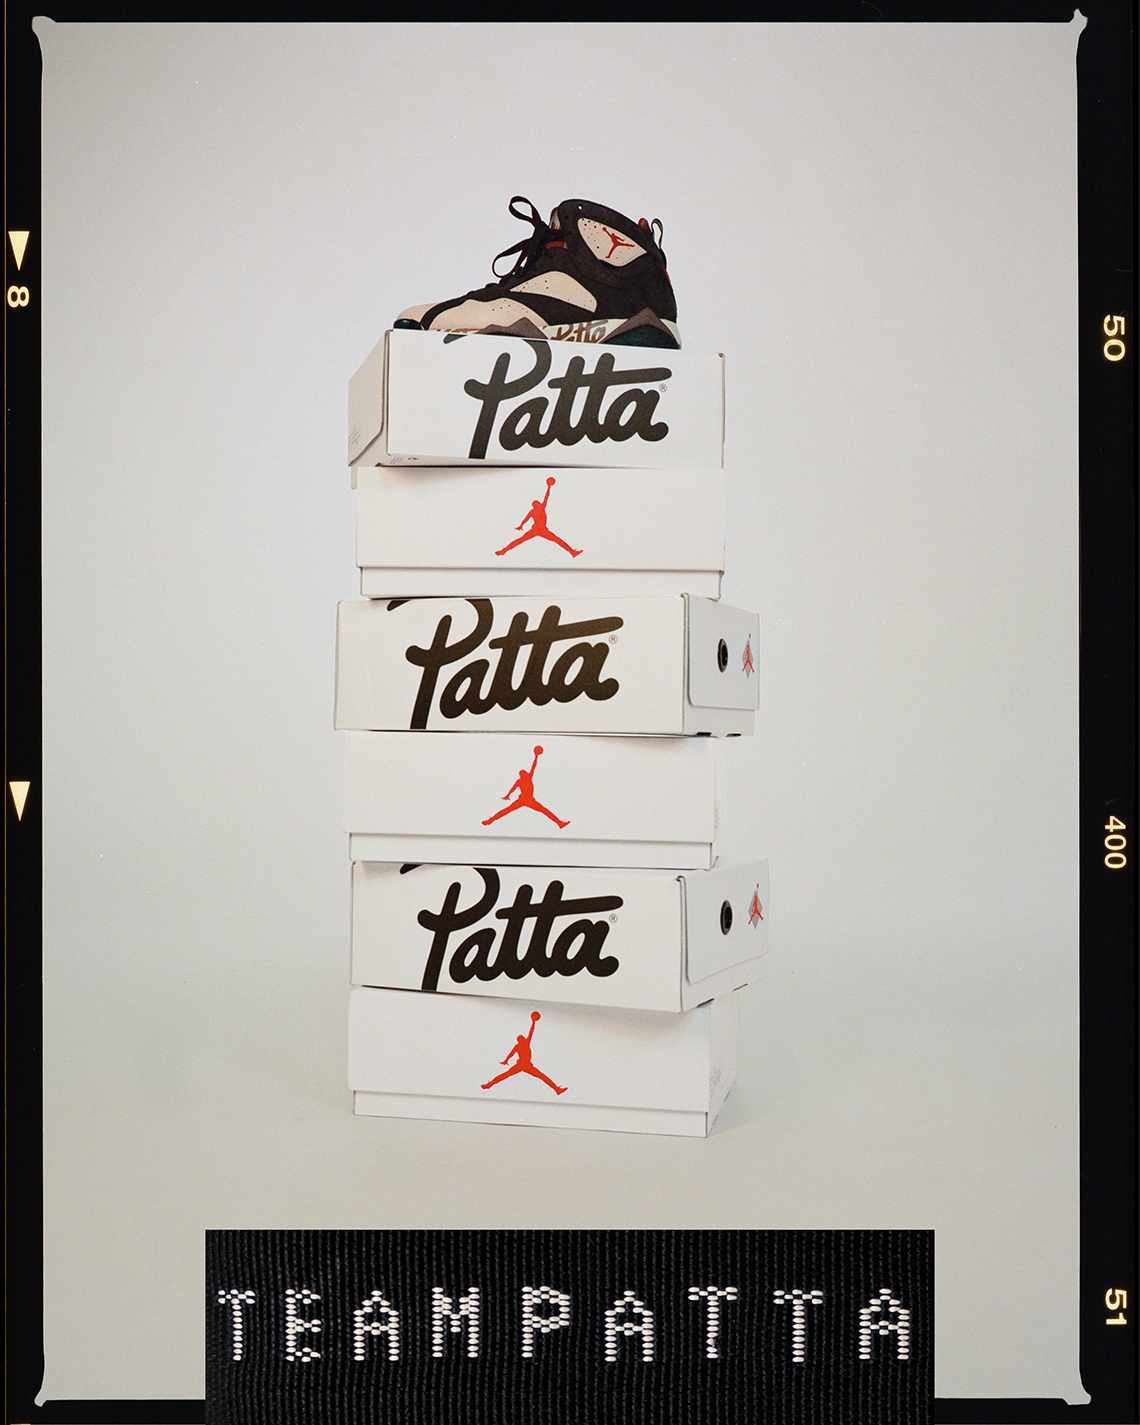 Patta jordan jumpman team 1 white university blue now available Collection Release Date 10